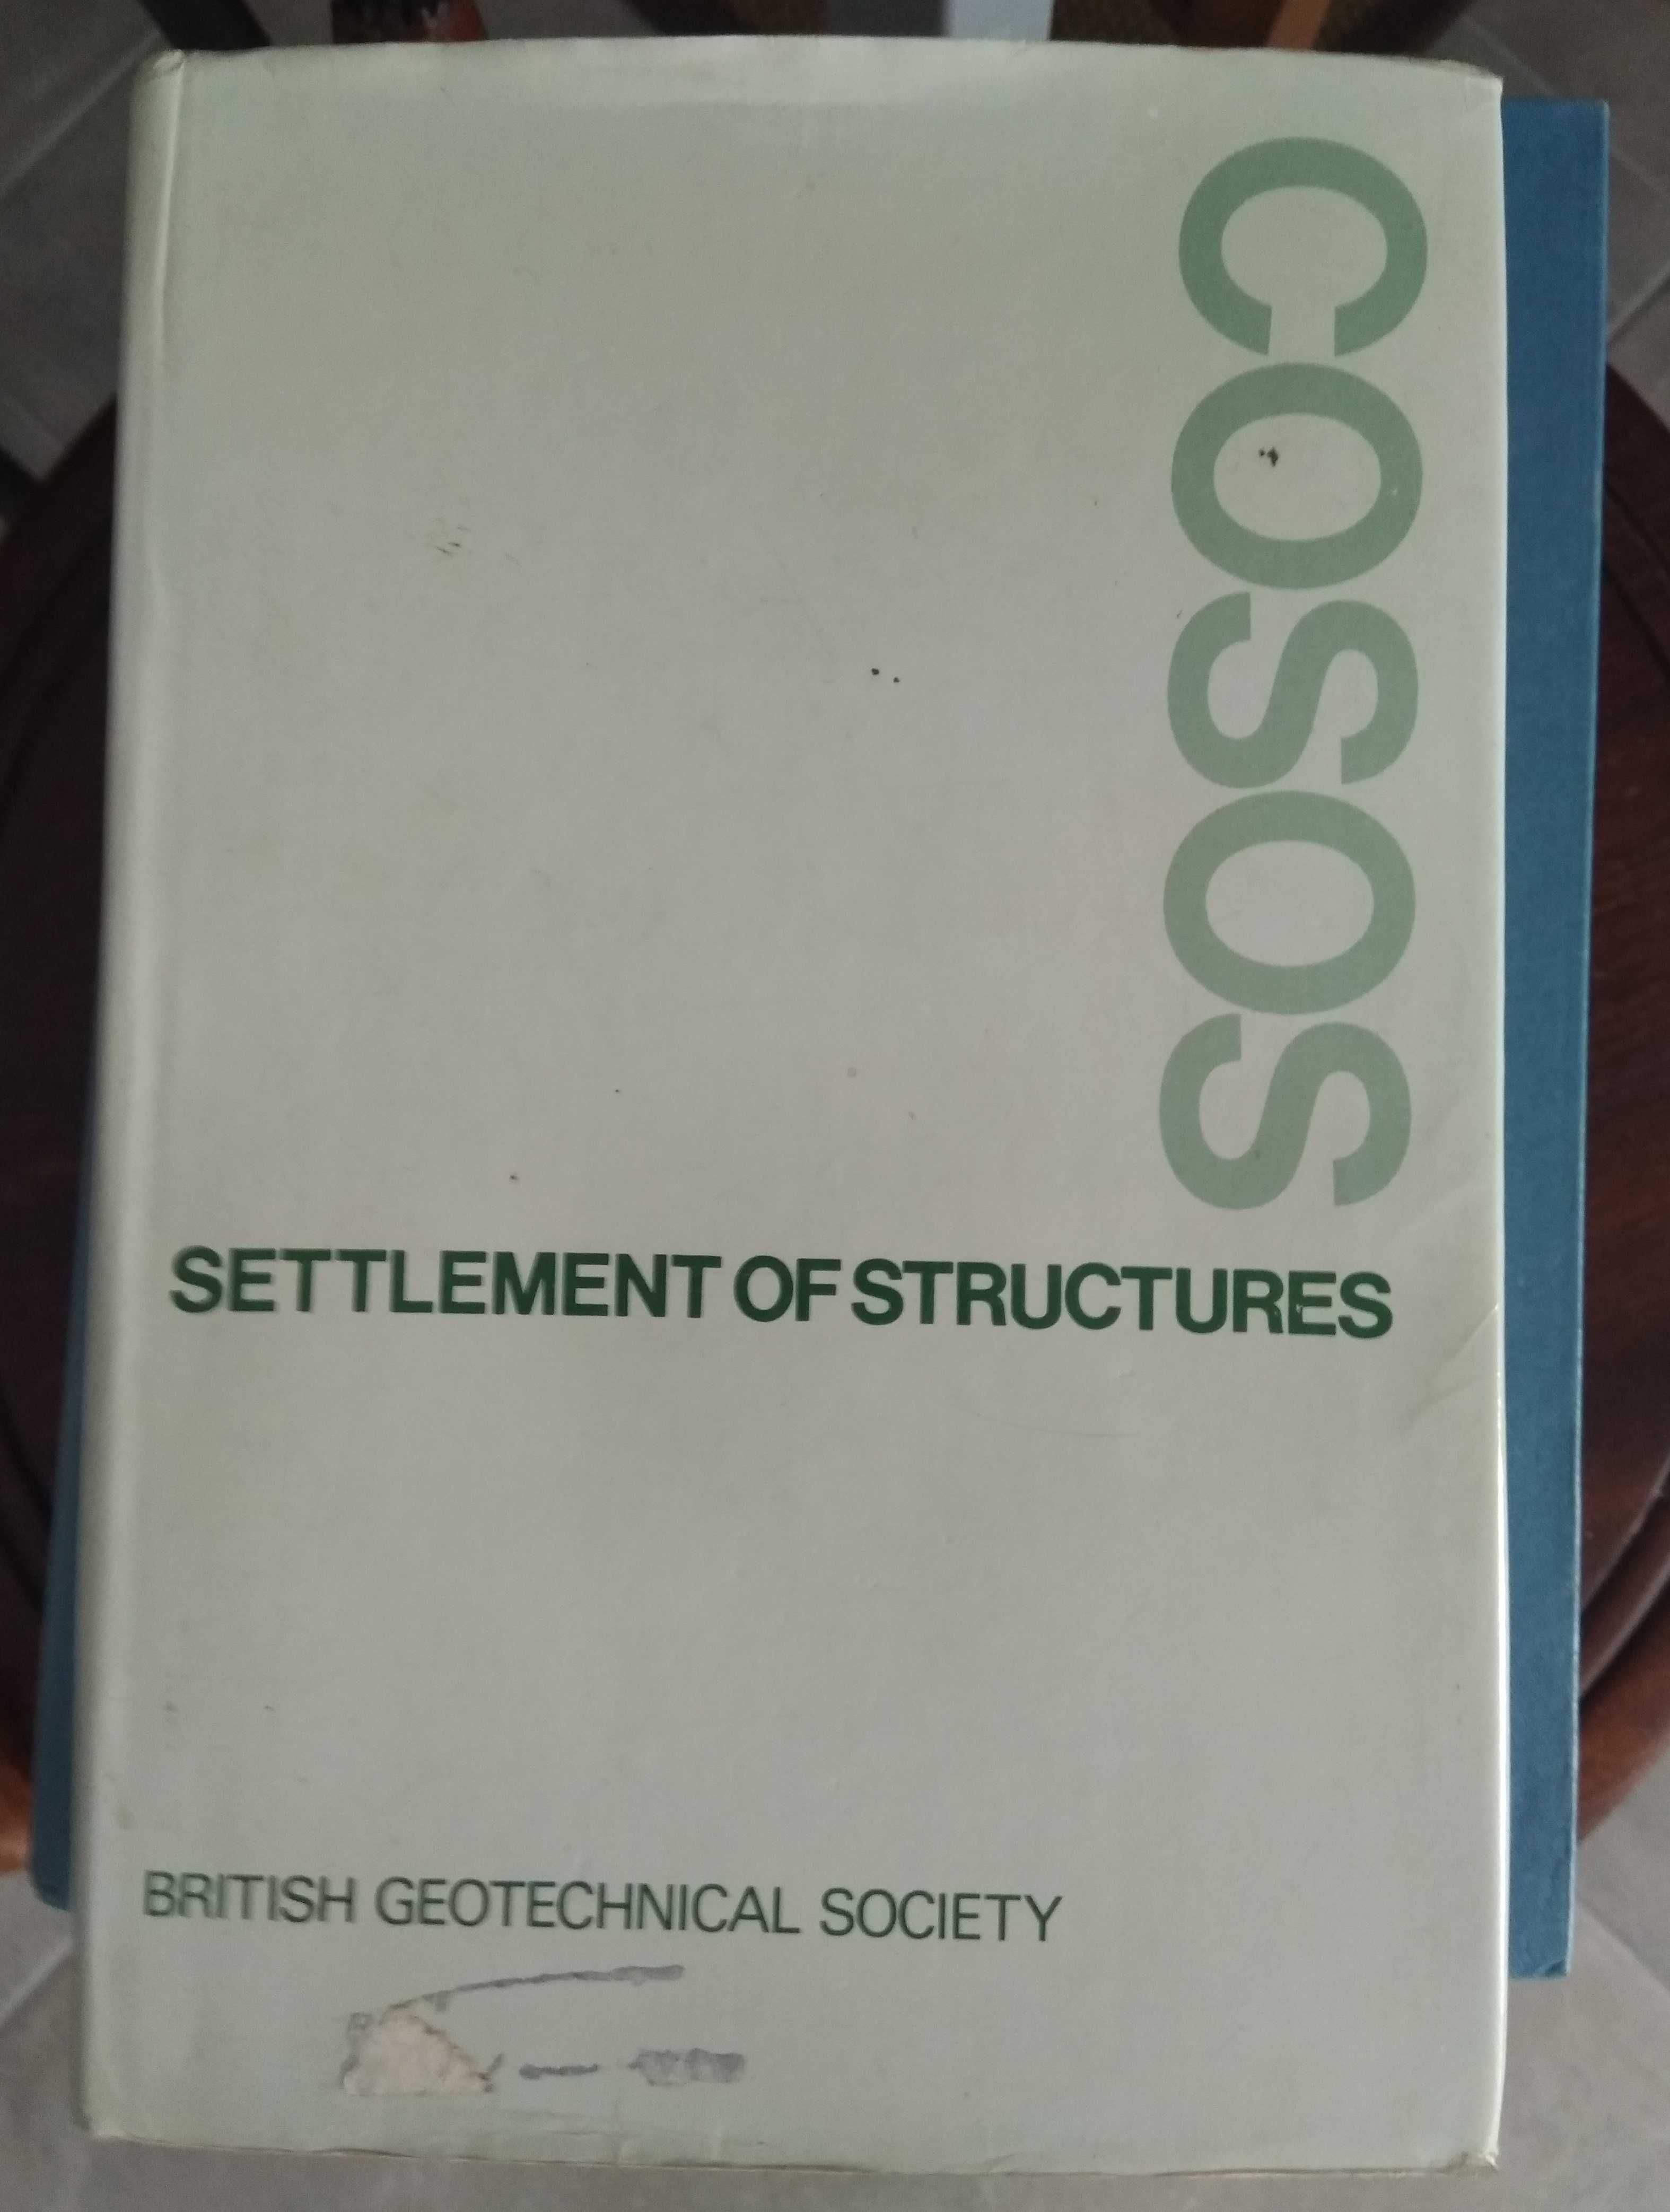 Livro Técnico Settlement of Strucutures – British Geotechnical Society